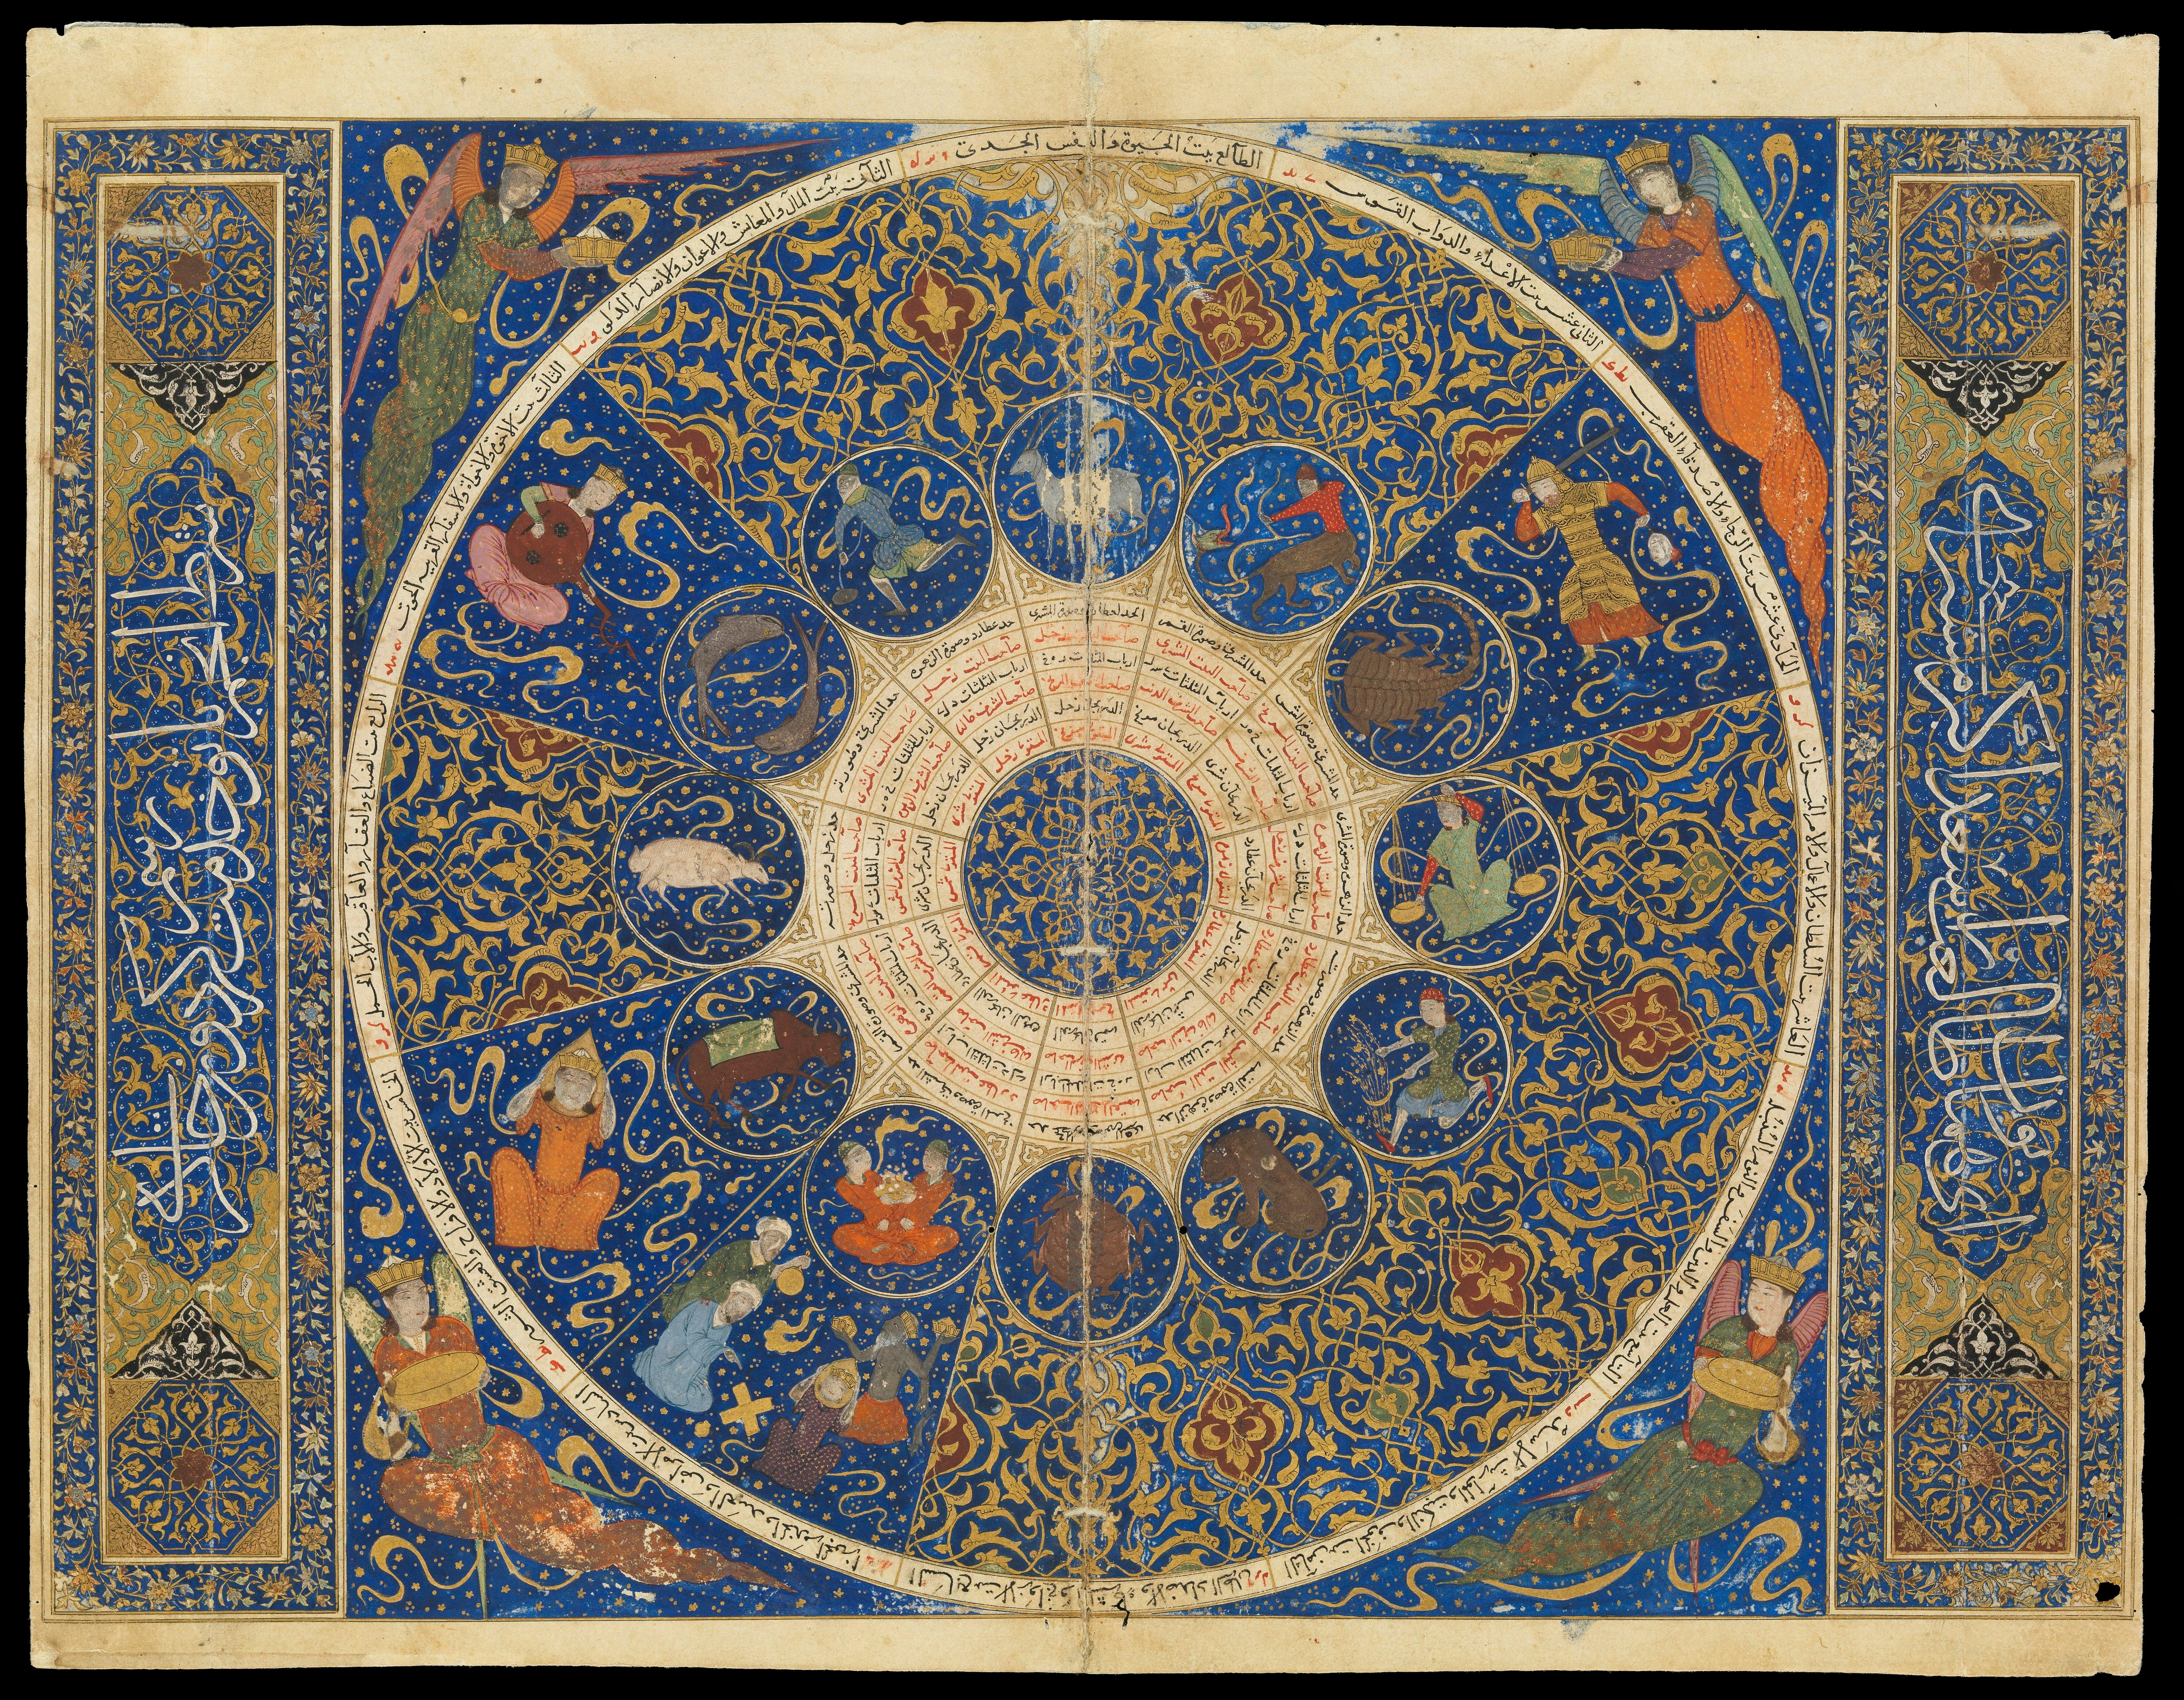 "Mahmud ibn Yahya ibn al-Hasan al-Kashi, Horoscope from the Book of the Birth of Iskandar", Persia, 1411. Digital Image courtesy of The Wellcome Collection's Open Access Program. © Museum Associates/LACMA.